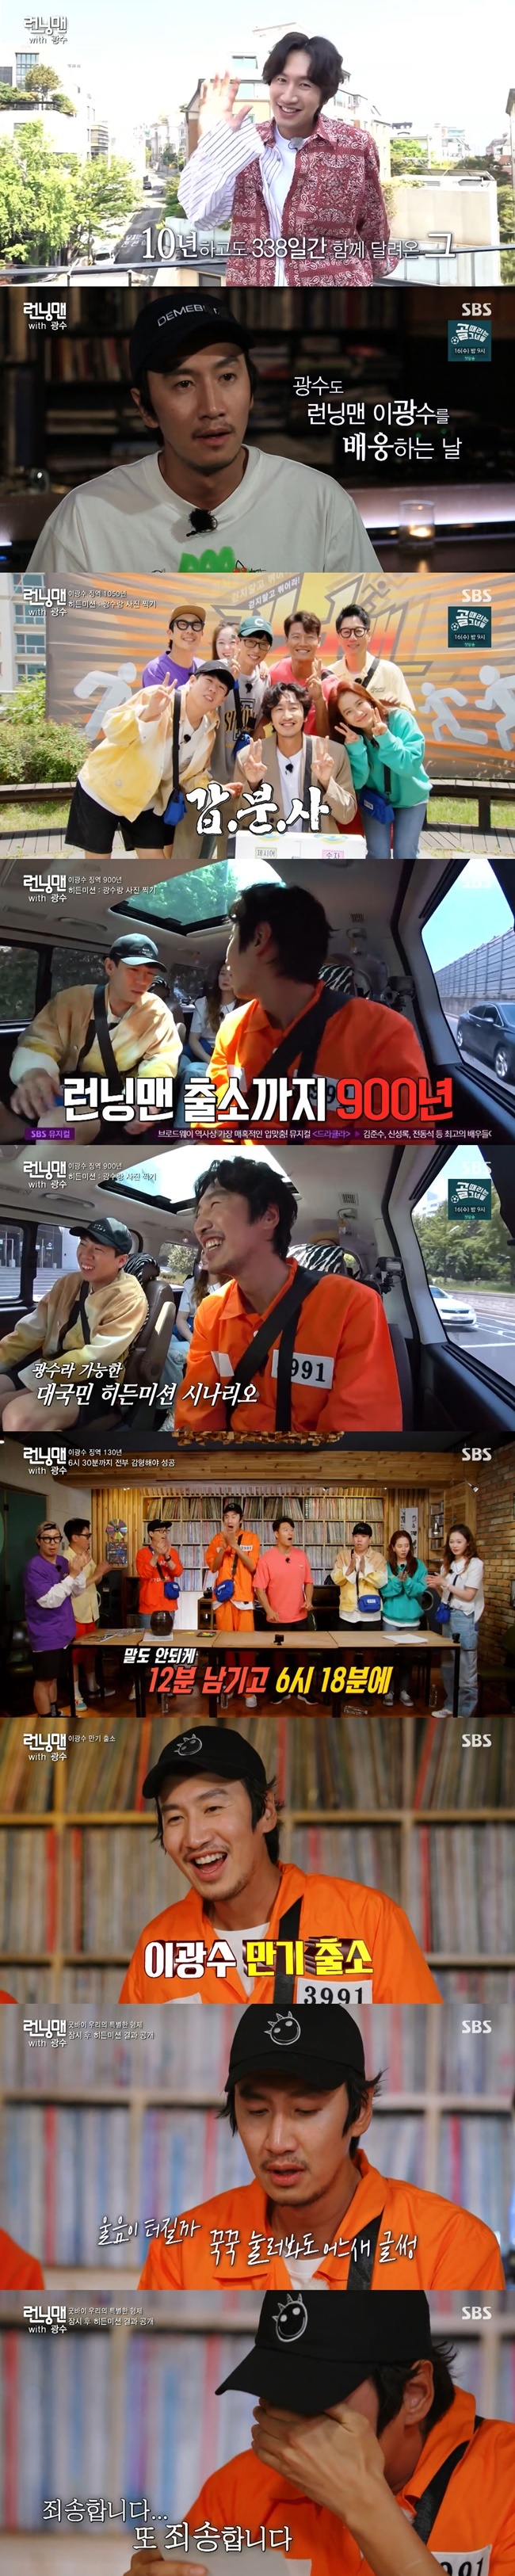 Lee Kwang-soo bid farewell to Running Man with 11 years togetherOn SBS Running Man broadcast on June 13, it was decorated with Goodbye, My Special Brother race for Lee Kwang-soo getting off.The story of Lee Kwang-soo leaving Running Man in 10 years and 338 days was drawn.Lee Kwang-soo met the production crew at the pre-recorded car alone cafe before getting off.Lee Kwang-soo said, I want to go to the first SBS rooftop one, Han River, which I often went to, and I want to eat one of the chickens I ate when I filmed at my house.It is a memorable food personally. It has been a long time since I ate pork belly so delicious recently.  I think you would like to go to an LPG bar once more.I personally hope it was like normal, he said.On July 11, 2010, the opening ceremony was held at SBS rooftop one, the first filming location of Running Man.The production team revealed that Lee Kwang-soo has been charged with property damage, assault, performance pornography, and fraud committed by Running Man, and that he has been sentenced to 1,050 years of imprisonment.The goal is to reduce Lee Kwang-soos sentence and refine it until the recording is over.Among them, Hidden mission requires members to take pictures with Lee Kwang-soo and get gifts.The first mission is success when Lee Kwang-soo draws a number with Jessie and completes the question, and it happens the same as the number selected by the corresponding members.Lee Kwang-soo then picked up Last Nights Curry, Tomorrows Bread in Jessie and said, Last Nights Curry, Who did not eat Tomorrows Bread dinner?I made it a question, but when I heard it, Ji Suk-jin laughed back and asked, Why do you think we couldnt even eat because you were sick of going out?In the first mission, 150 years were reduced.Before moving to the lunch venue, Lee Kwang-soo changed into a prison uniform; the prisoner number 3991 on the prison suit was his time with Running Man.Lee Kwang-soo then dressed in a pork belly and a chicken noodle at the Choices Han River.The members recalled memories, saying, I just eat rice soup, What pork belly is it? The second mission was reduced by 150 years.The third mission was to match the Chinese characters notes; the members showed off their can aspect, while successfully commissioning with pride and reducing the 200-year sentence.The fourth mission is a success if you do not call Lee Kwang-soos acquaintances and play Lee Kwang-soo.Ji Suk-jin has Choices the security prefecture that Lee Kwang-soo has never spoken to.Ji Suk-jin attempted a bluff Lee Kwang-soo vocalization, but An Bo-hyeon did not notice it.After confirming his identity, Ahn Hyun laughed, saying, I thought my voice was a bit strange, but I wanted to cry.The last mission was to meet the Lee Kwang-soo problem at the LP bar.Lee Kwang-soo solved problems such as fathers name, Lee Kwang-soos bicycle pattern, and mobile phone number, leaving Imprisonment with only 130 years left.Lee Kwang-soo challenged the final reduction through a Tong-Ajeos board game; Lee Kwang-soo was shocked by his success in the game in just one attempt.While the photo taken on the day was printed, the members wrote a letter to Lee Kwang-soo.Lee Kwang-soo poured tears into the first, Ji Suk-jin letter, without even reading out; Yoo Jae-Suk wrote: I was not bored because of the light.Now, Seokjin and Sechan should play the role, he said, causing laughter.Kim Jong Kook said, I can not go together in Running Man, but I will go with the rest of my life.The members then selected Hot Goodbye as a song for Lee Kwang-soo.Lee Kwang-soo, Yang Se-chan and Jeon So-min also poured tears.Finally, Lee Kwang-soos letter was released: Thank you for making me feel another family, Im sorry, Im sorry again.I am sorry again, he said. I would like to ask for more love and interest in Running Man in the future. The Hidden Mission result was a tie for all members - another Hiddenmission prepared by Lee Kwang-soo.Lee Kwang-soos mid-term gift was not for me, but a gift prepared by Lee Kwang-soo for the members.The members were impressed that Lee Kwang-soo was in charge of mission for everyone, not himself.The production team delivered an album for Lee Kwang-soo and a hand letter written by 112 staff.